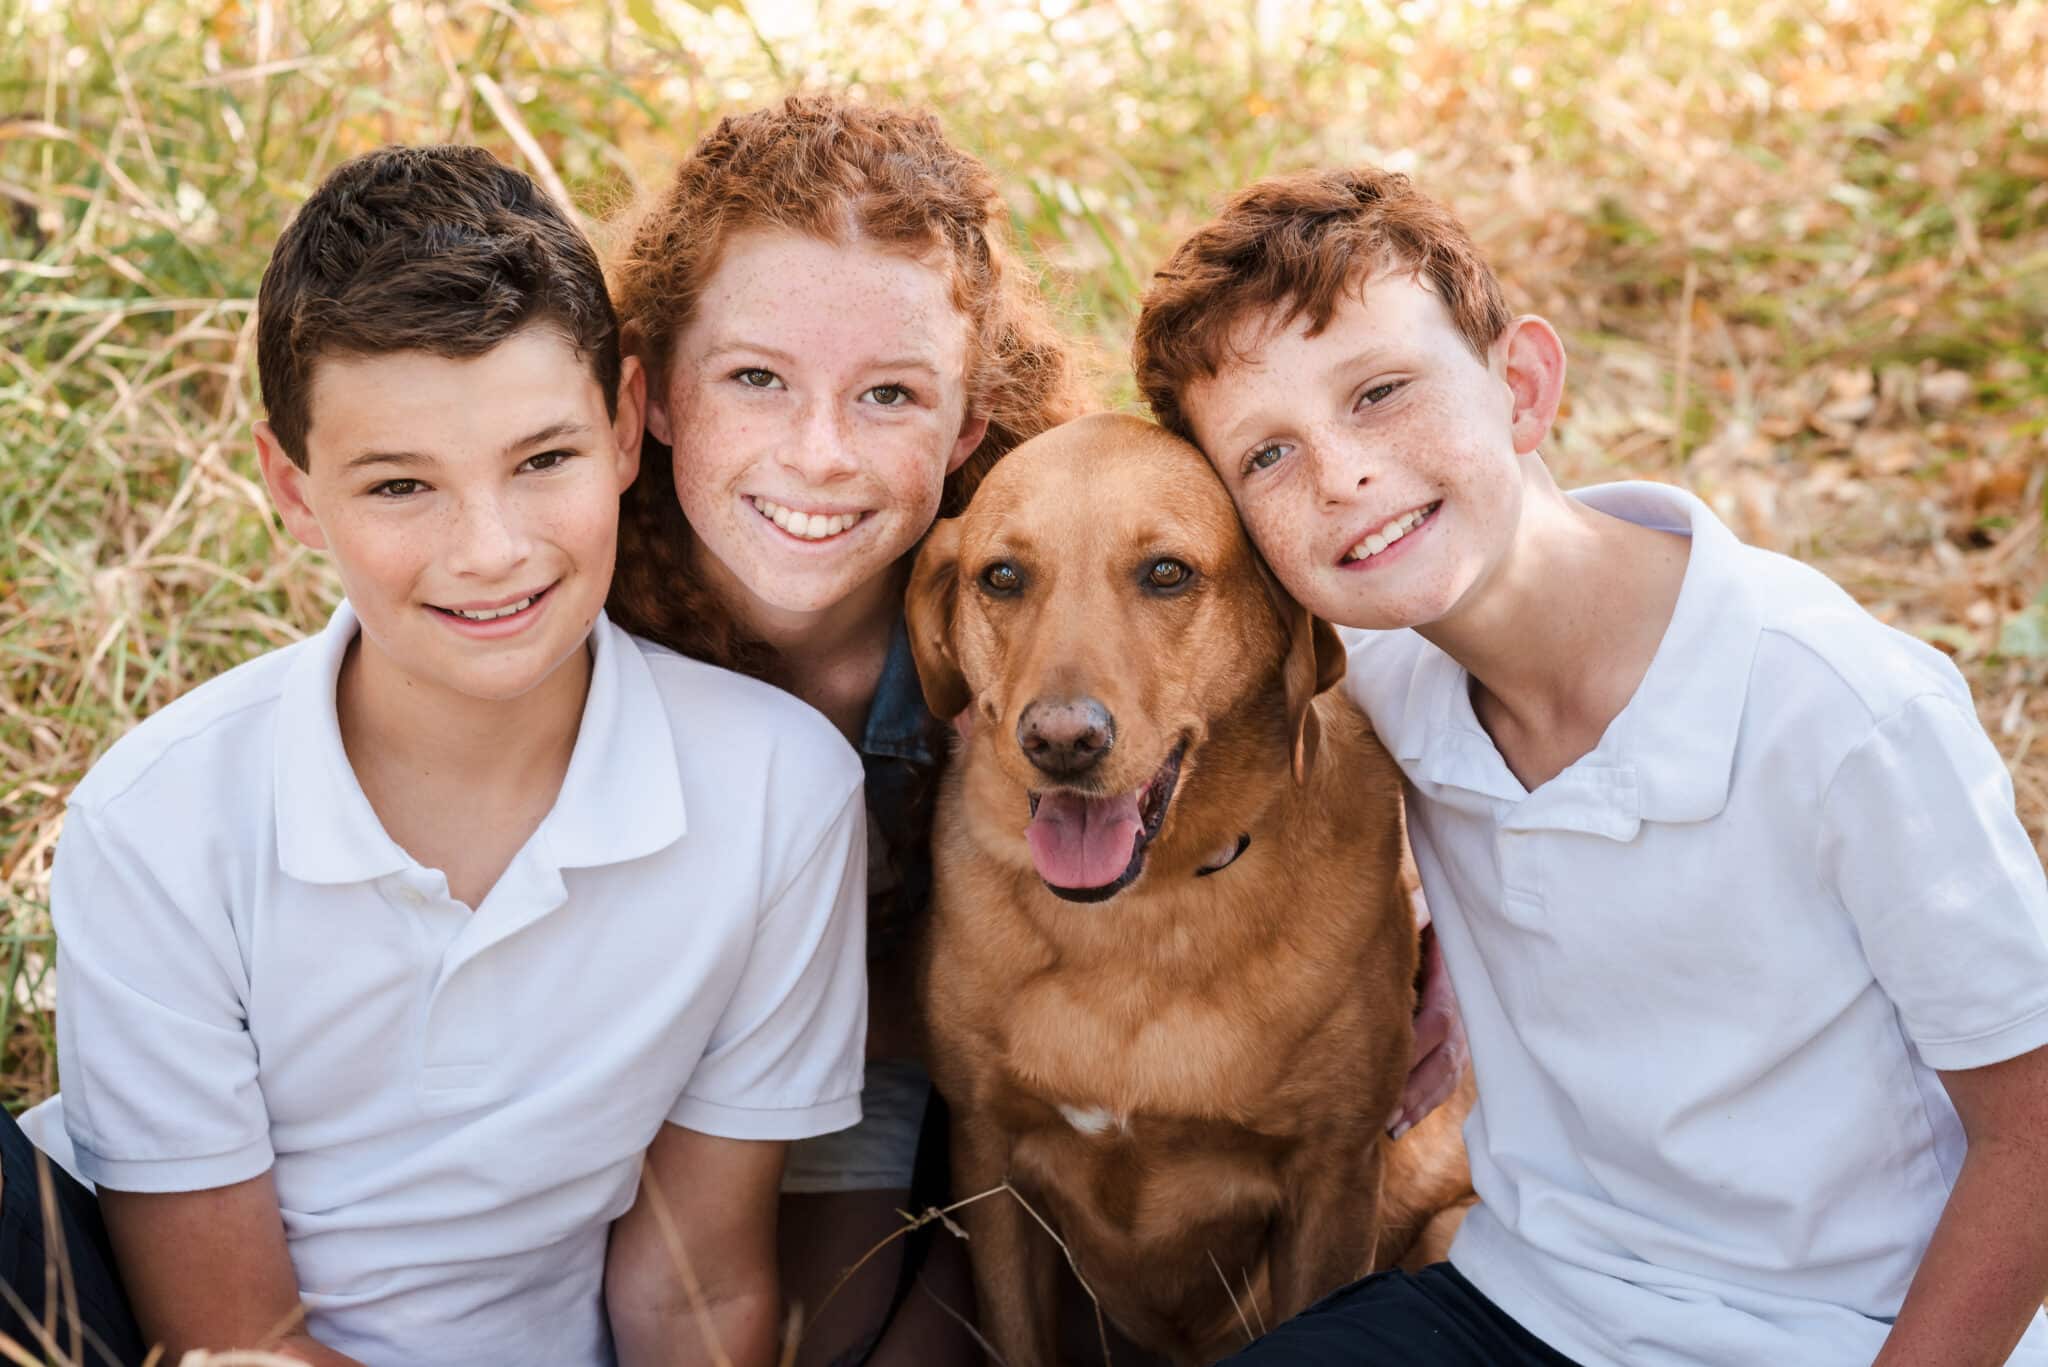 The best family portrait session includes a photo of all your babies, including the dog.